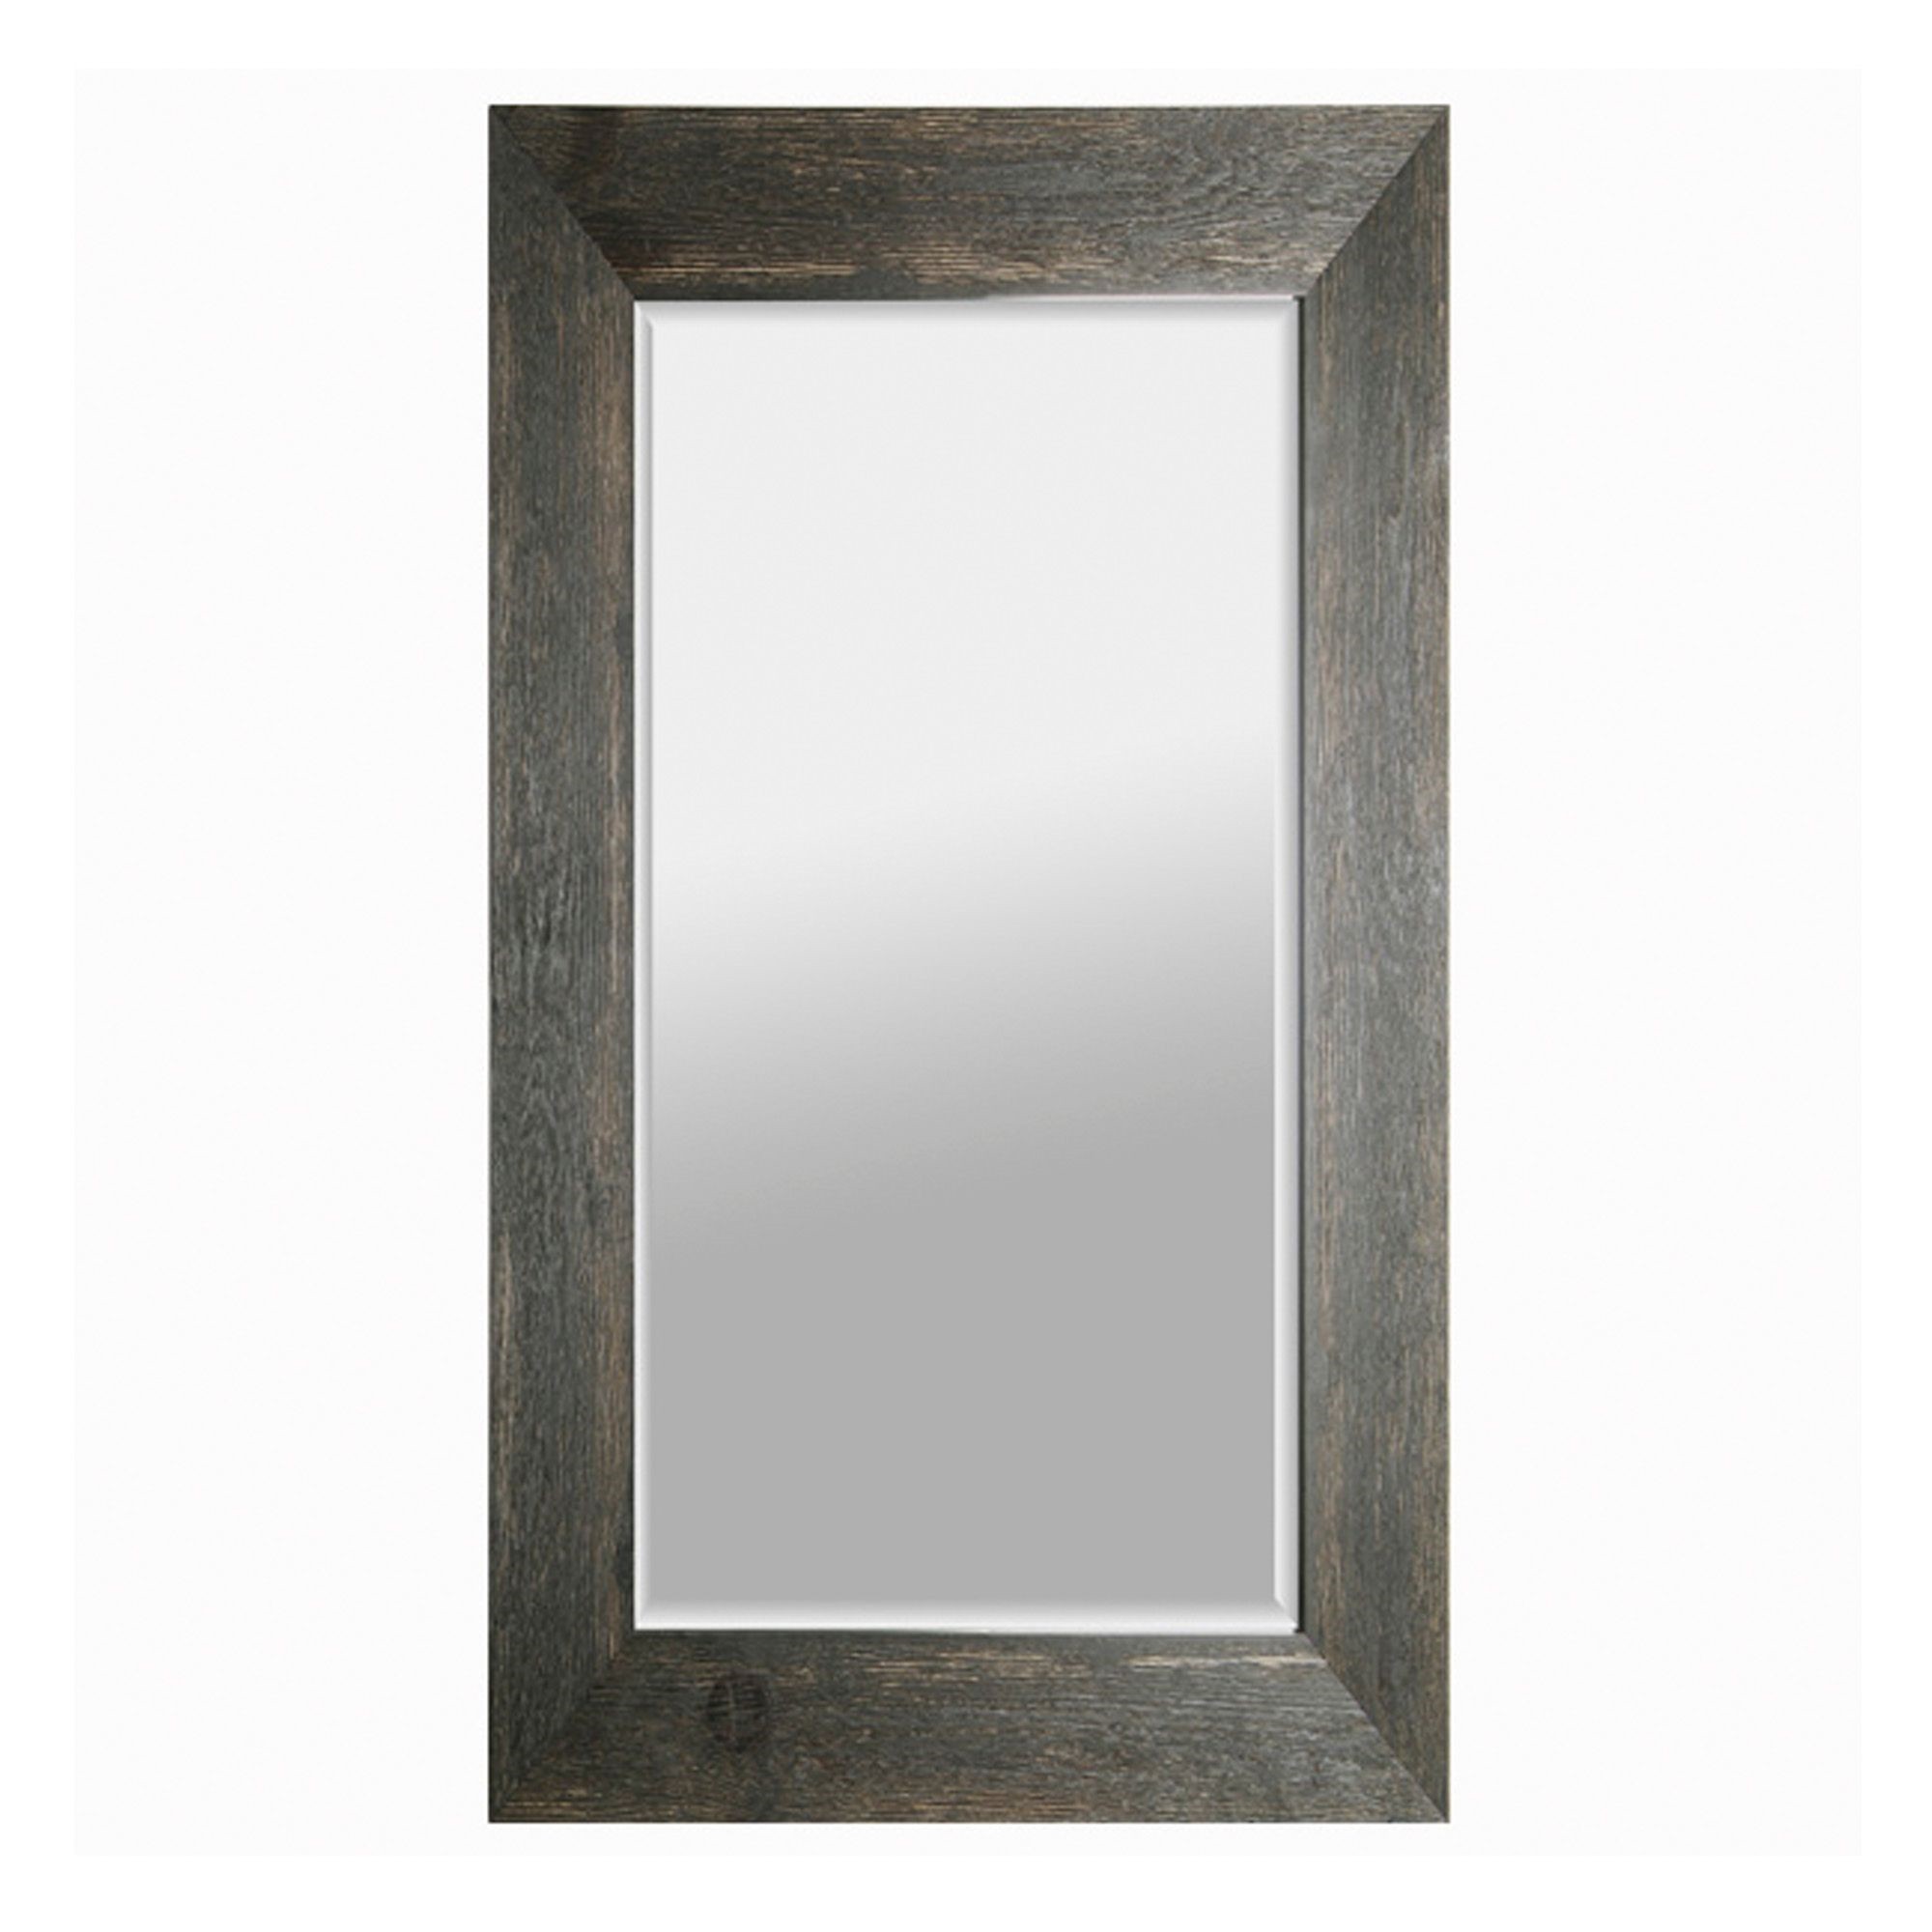 MIRRORIZE NM376ONL 34 INCH X 46 INCH BLACK STAINED REAL WOOD BATHROOM WALL MIRROR